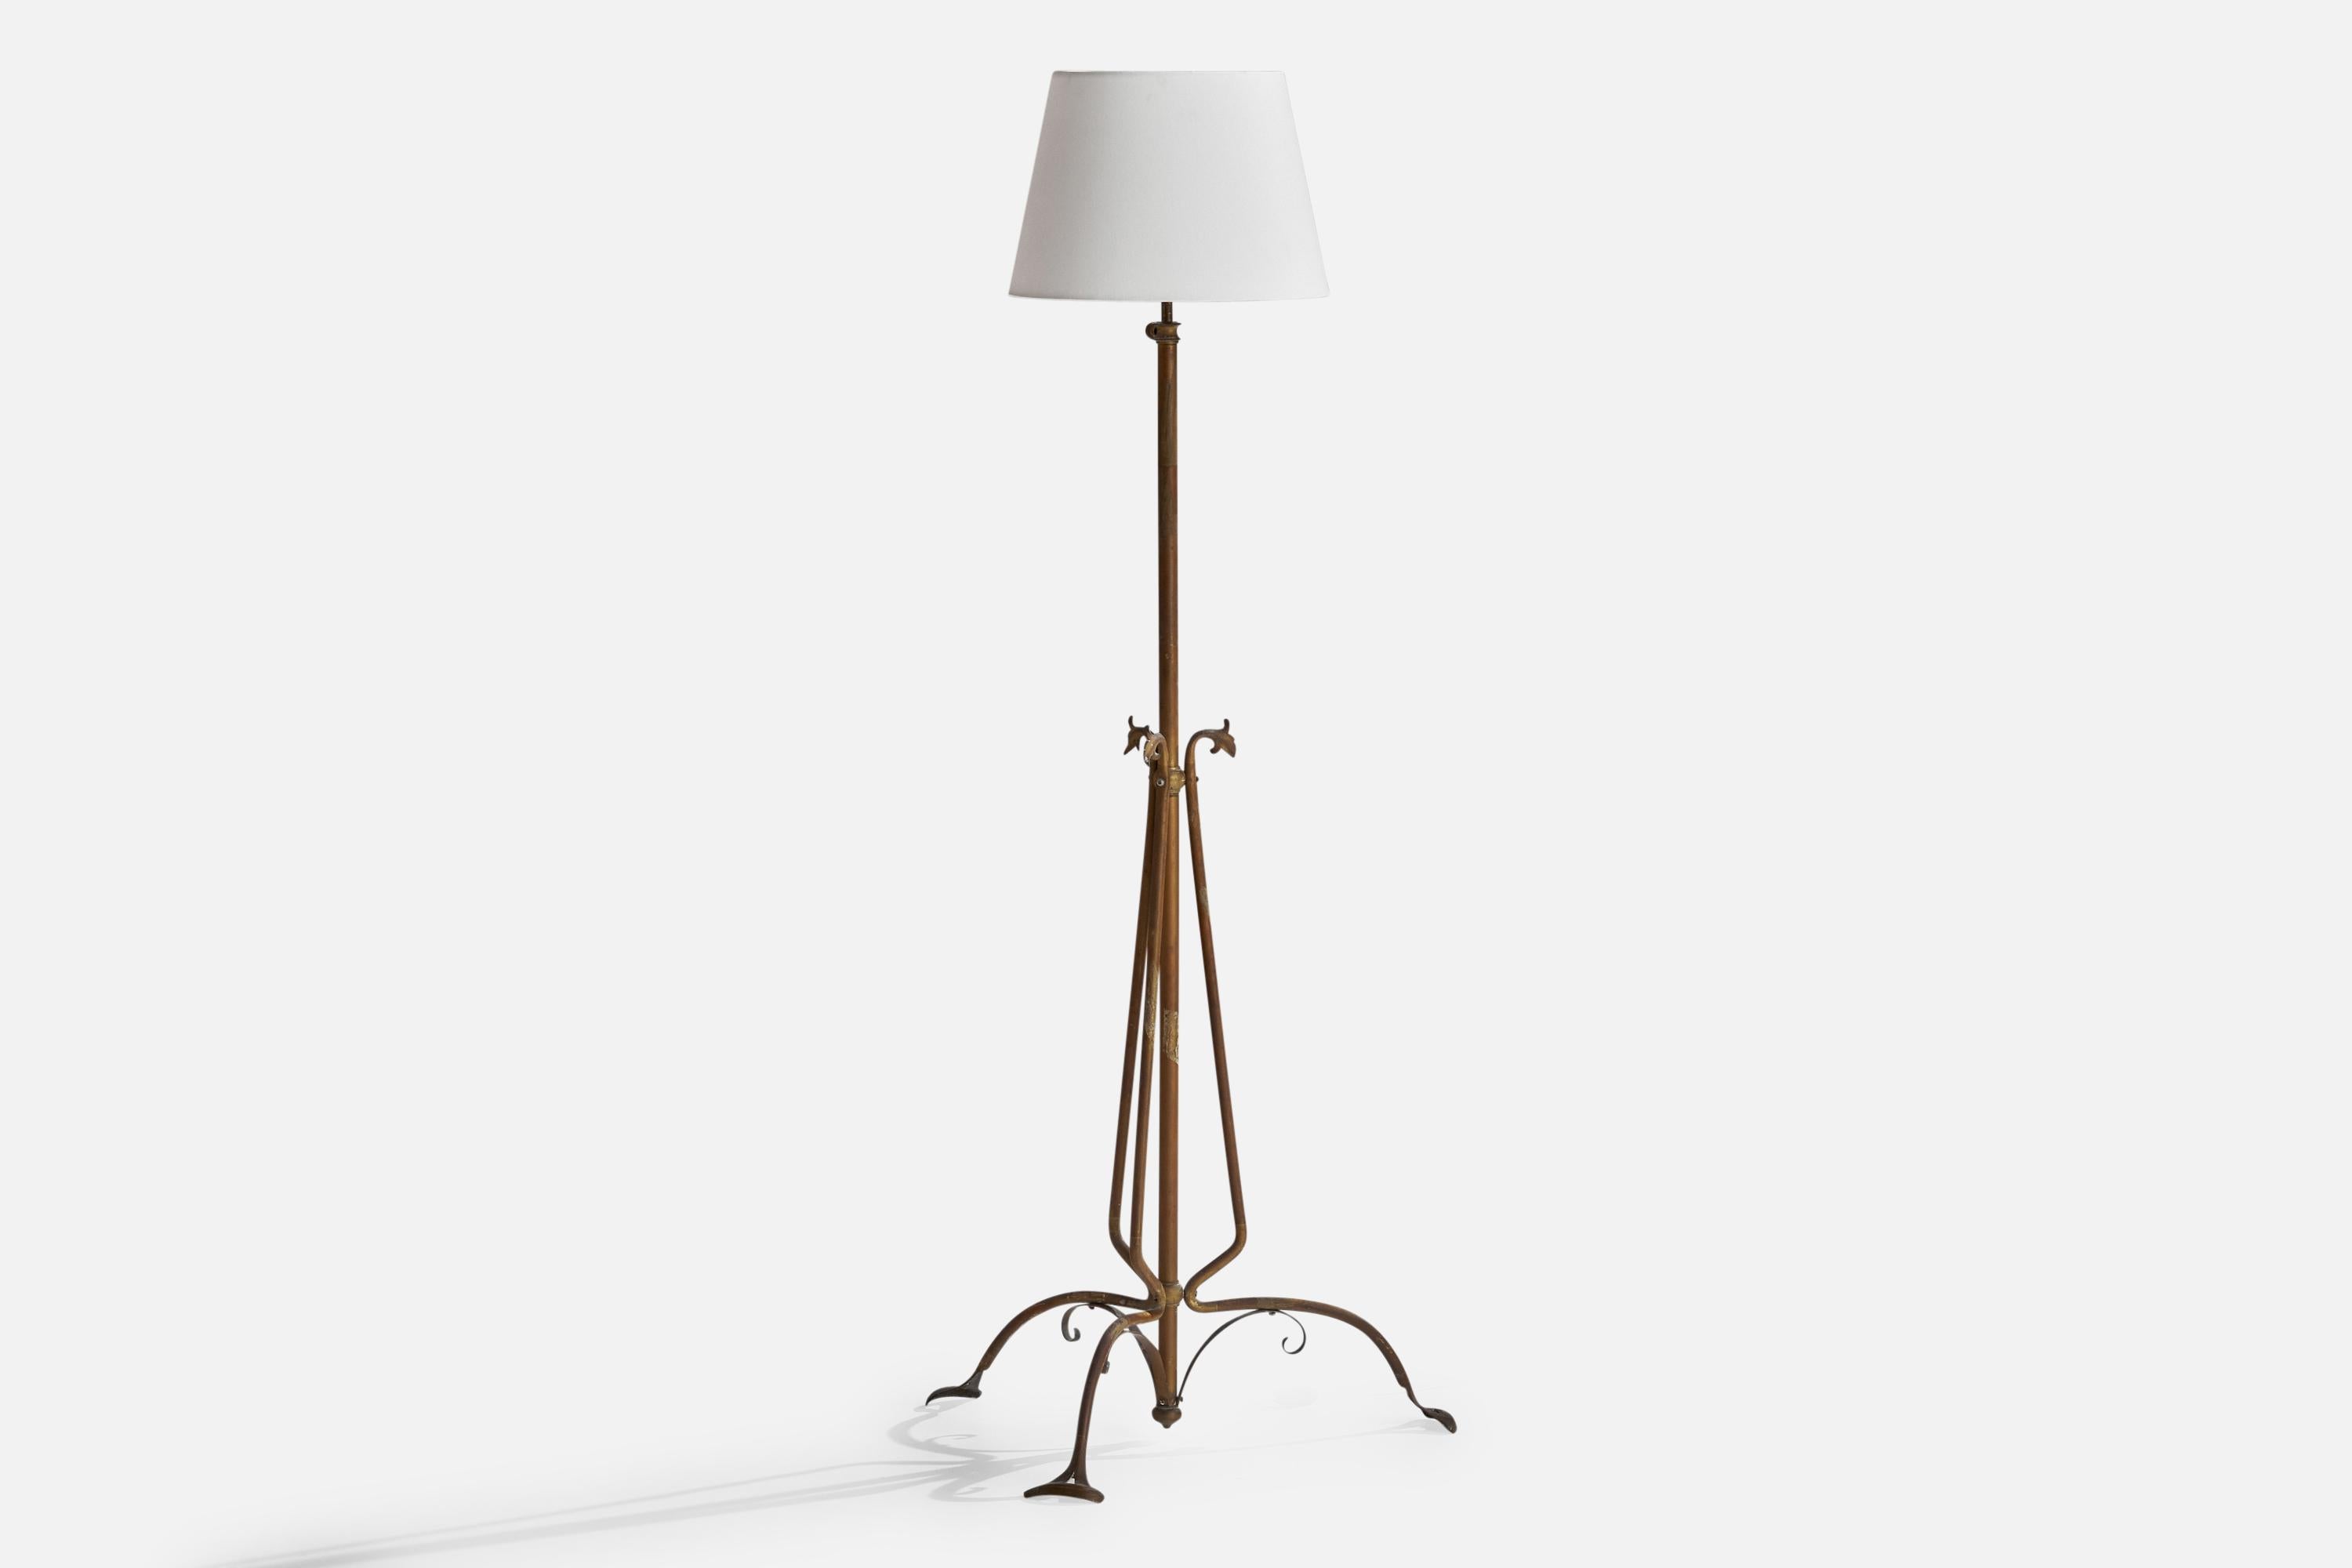 An adjustable brass and white fabric floor lamp designed and produced in Italy, c. 1910s.

Overall Dimensions (inches): 61” H x 22” W x 9” D
Stated dimensions include shade.
Bulb Specifications: E-26 Bulb
Number of Sockets: 3
All lighting will be